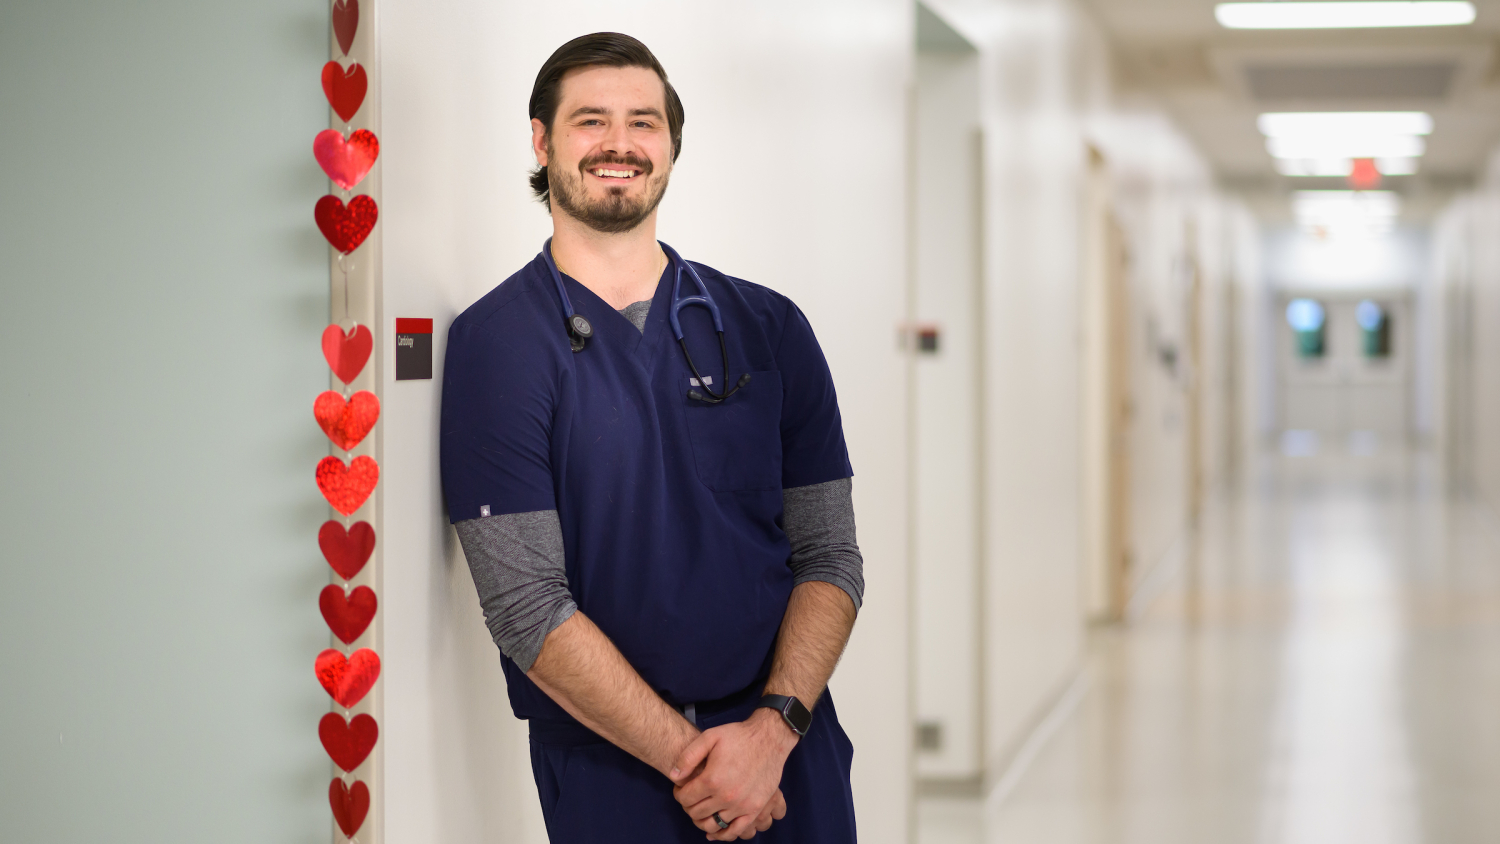 Dr. Seth Bowden, a cardiology resident at the NC State Veterinary Hospital, leans against a wall in the hallway outside the cardiology service at the NC State Veterinary Hospital. A strand of decorative hearts hangs to his right.